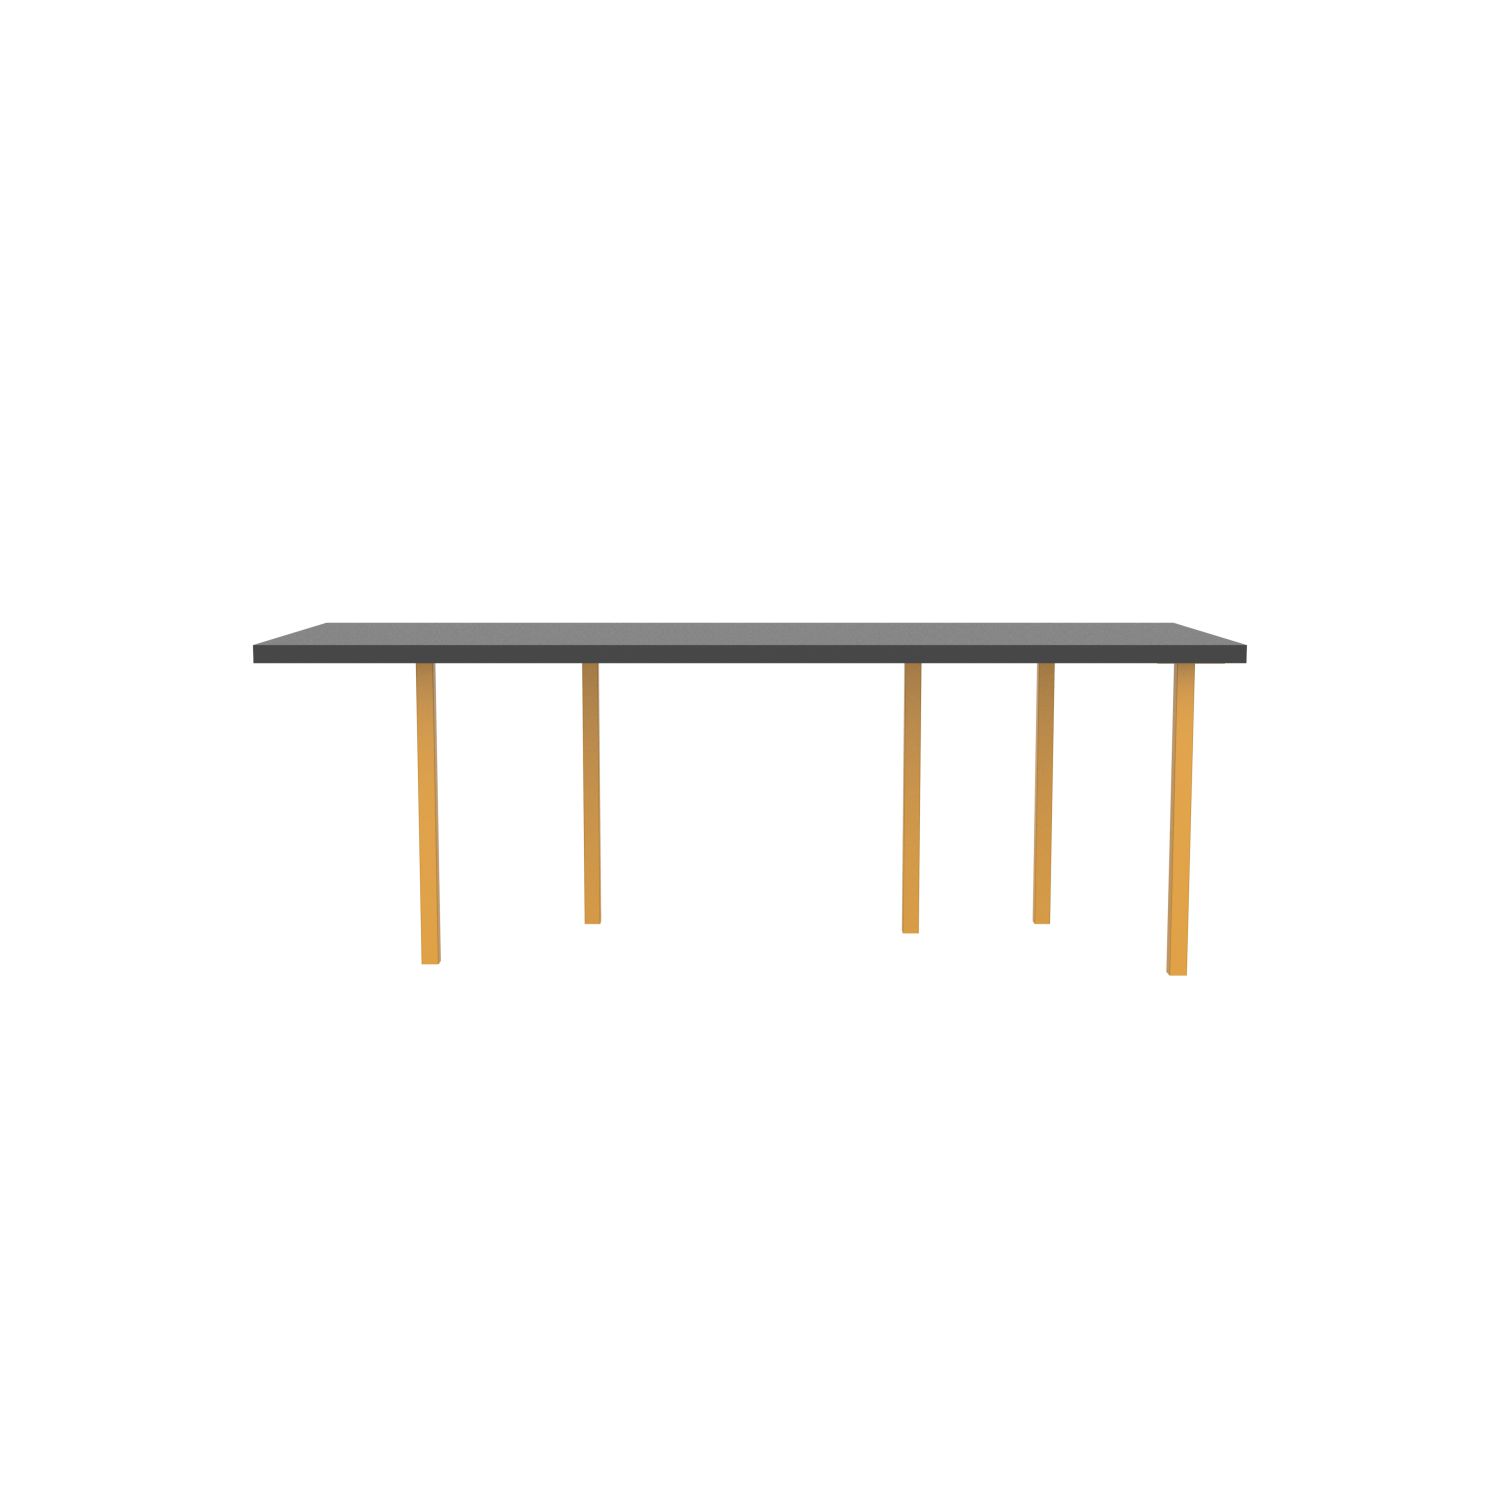 lensvelt bbrand table five fixed heigt 80x218 hpl black 50 mm price level 1 yellow ral1004